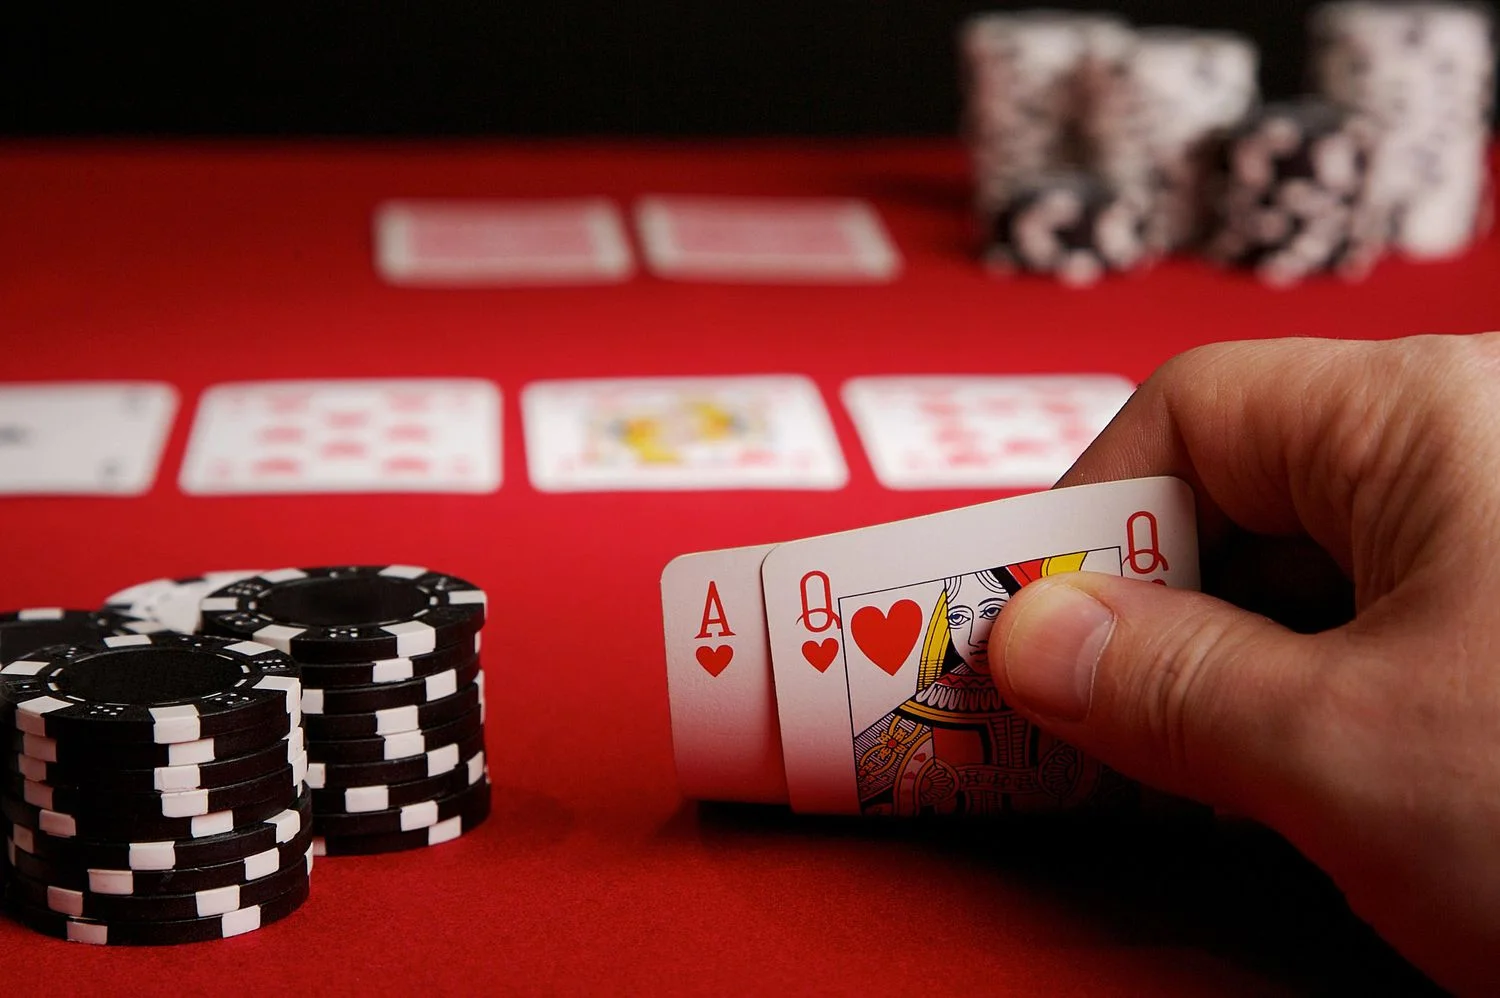 How to play poker Texas Holdem?